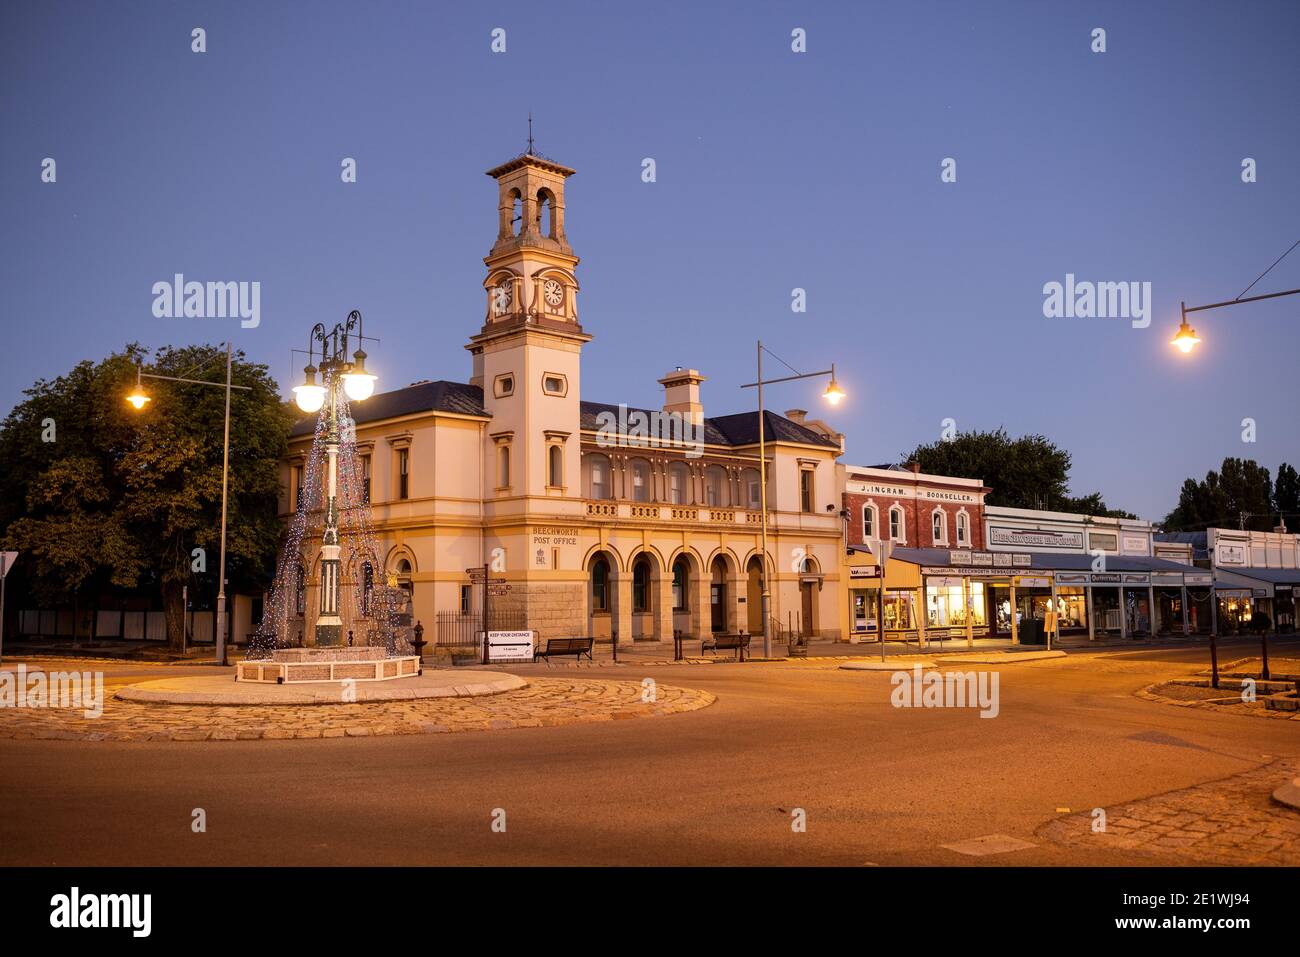 Night time view of the historic post office in Beechworth, Victoria, Australia Stock Photo